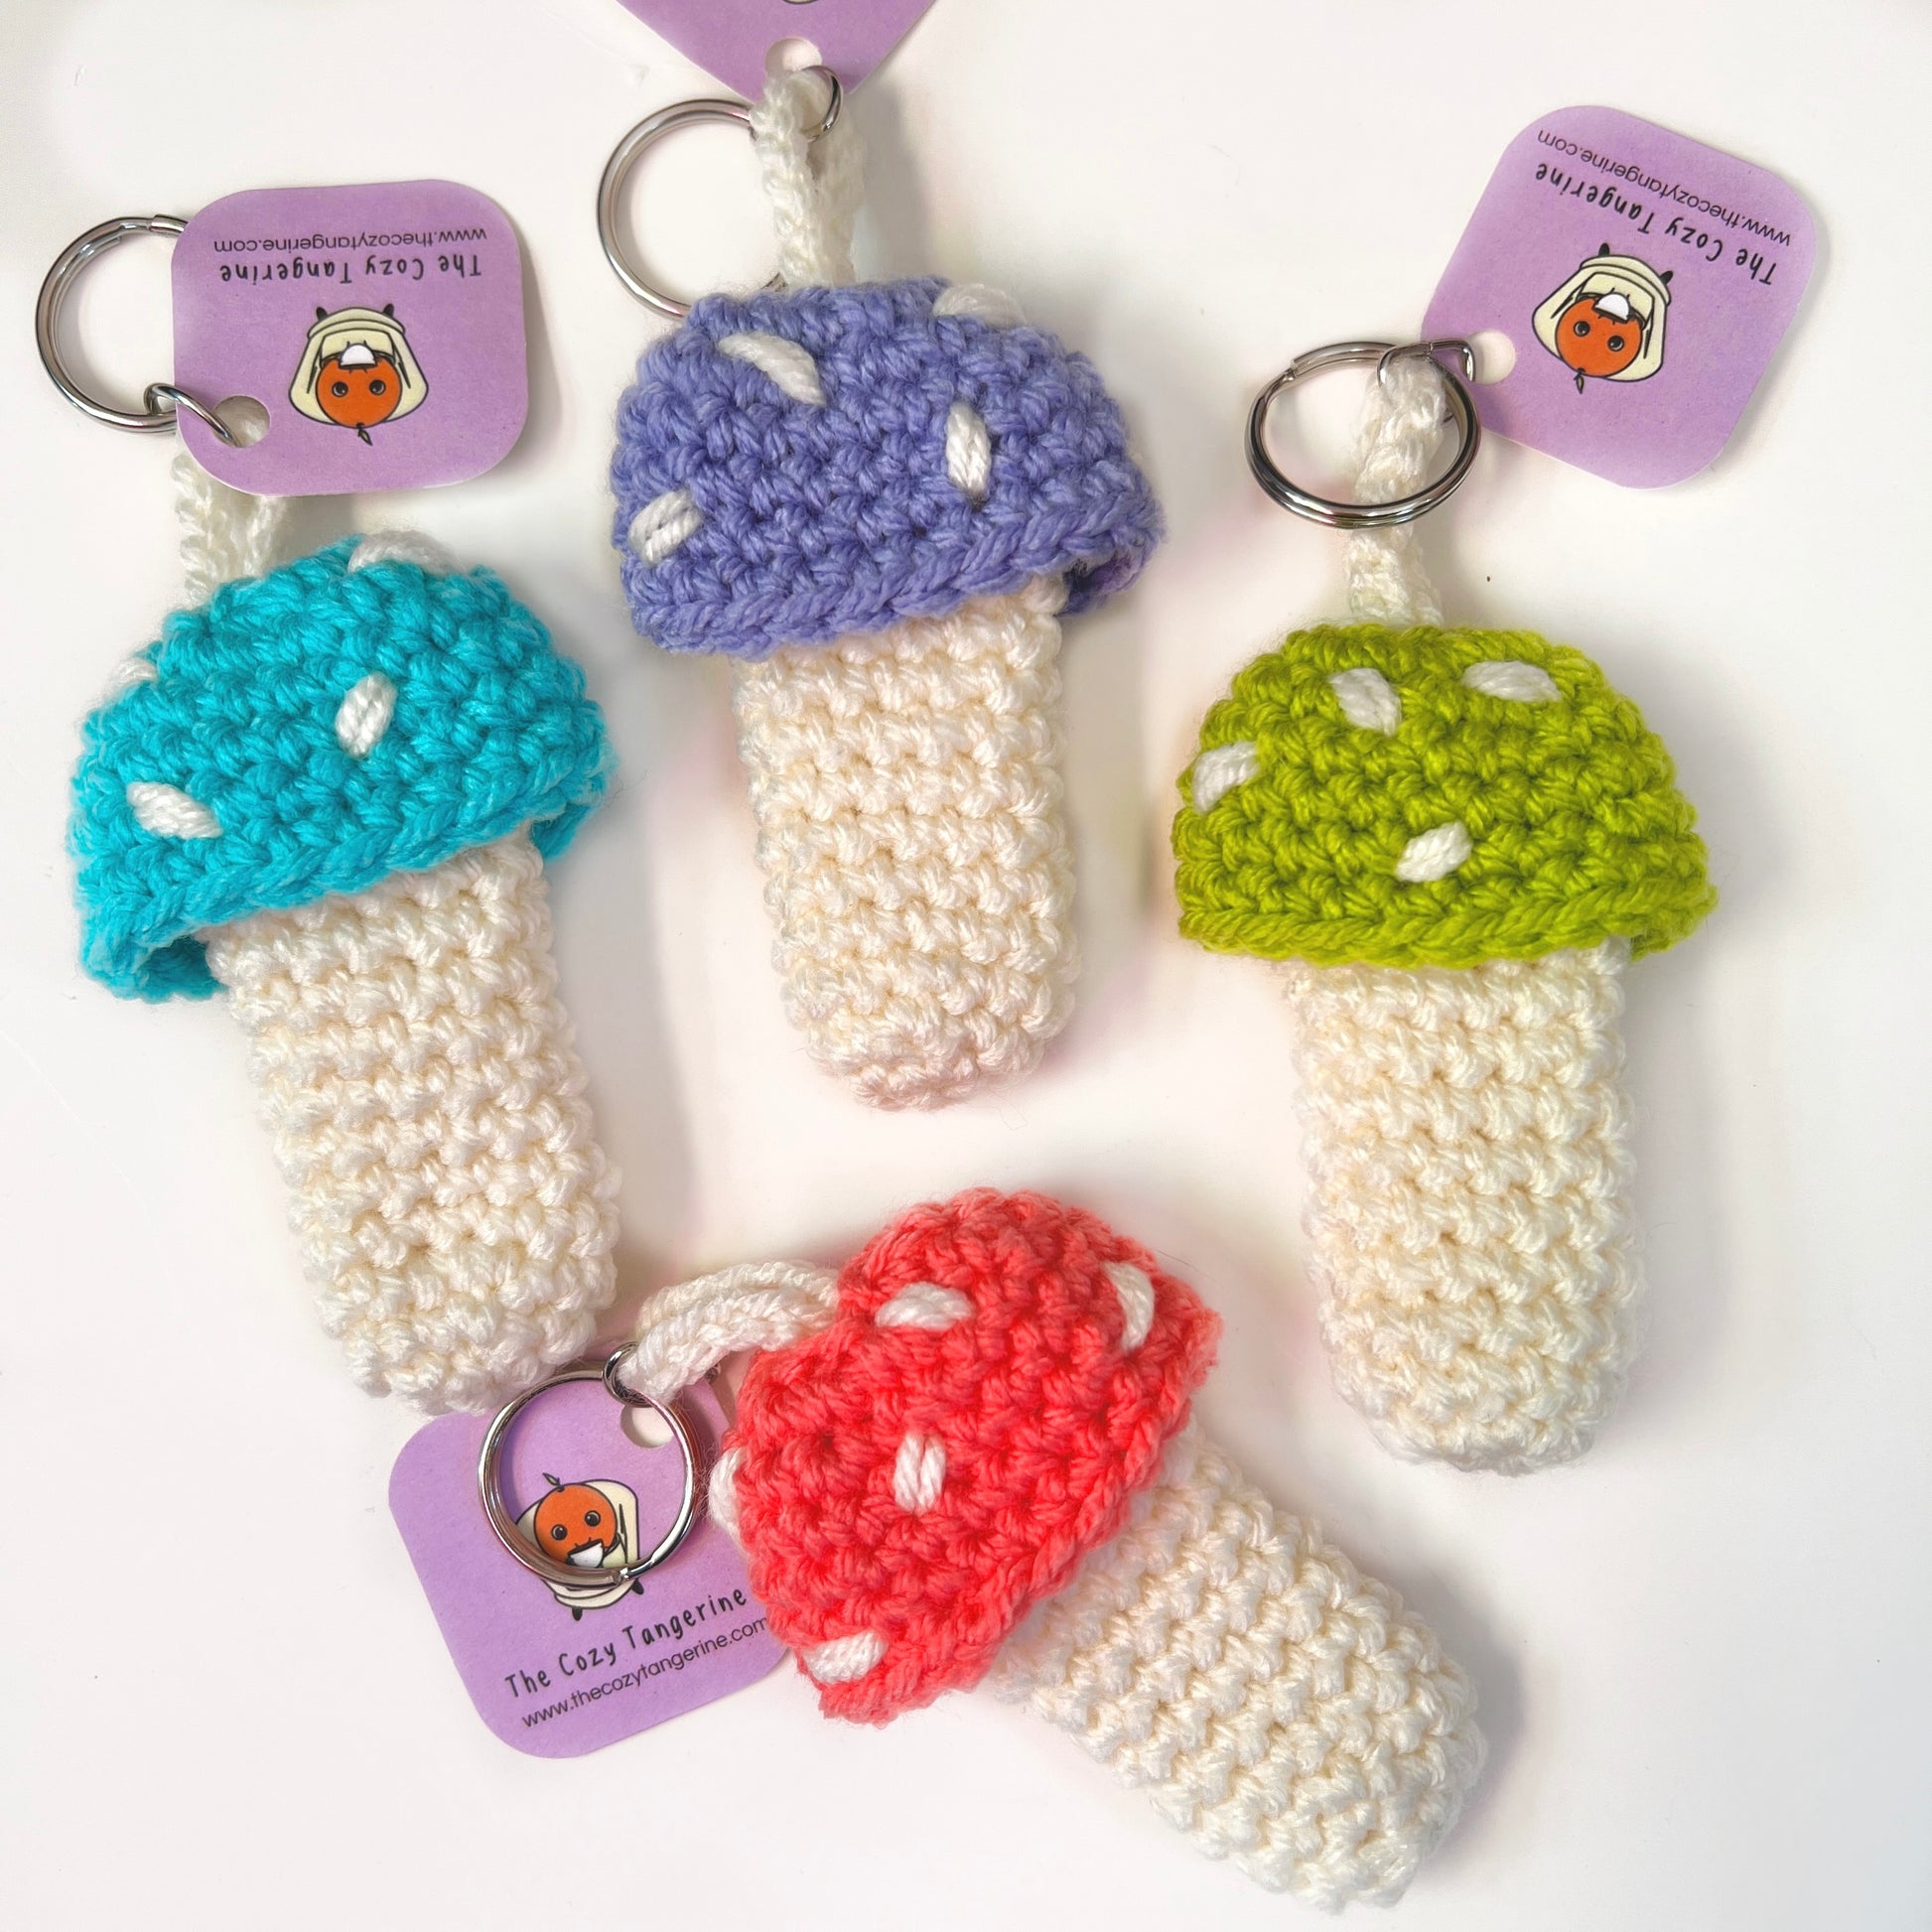 blue, purple, green and peachy pink mushroom lighter holder keychain. mushie chapstick carrying case